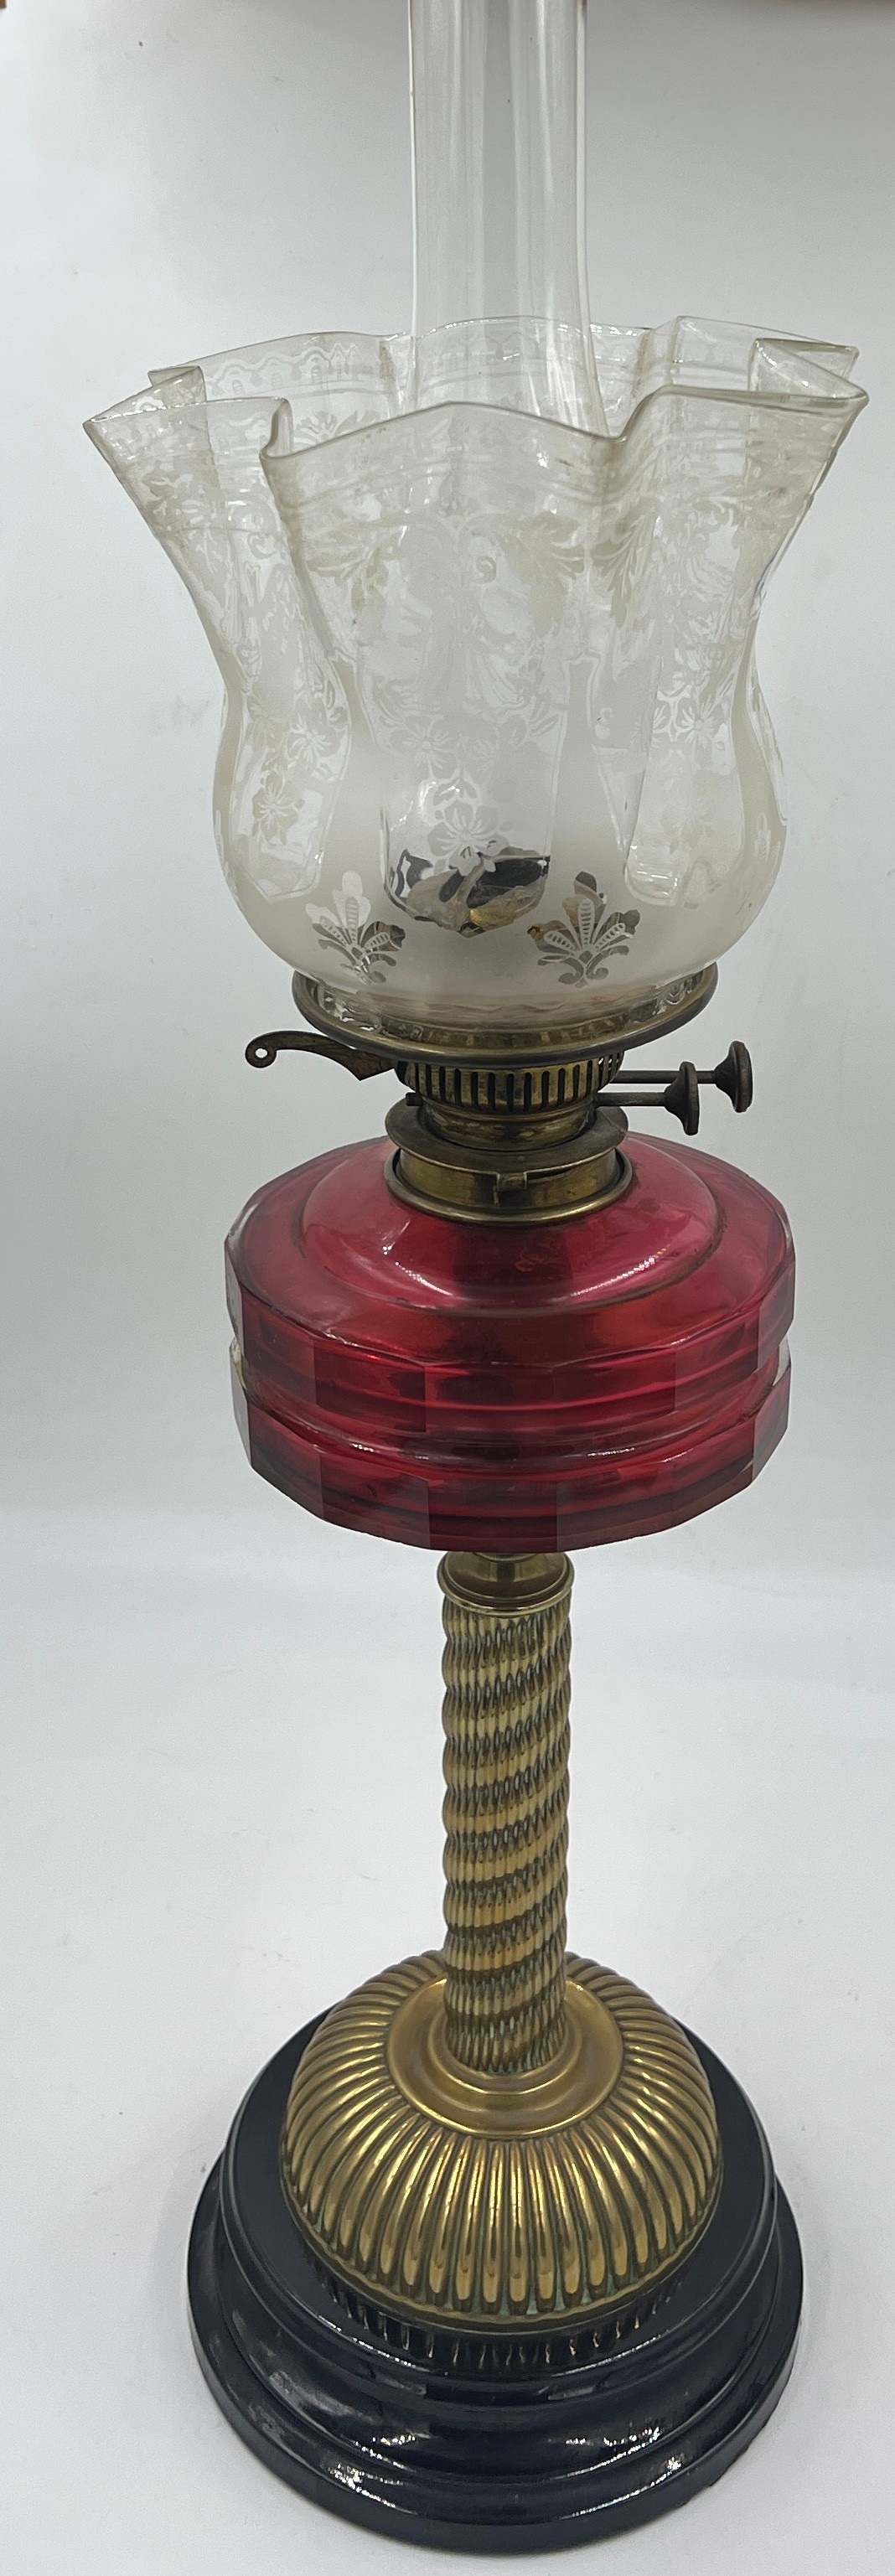 A 19thC cranberry glass and brass oil lamp on black ceramic base with etched glass shade and clear